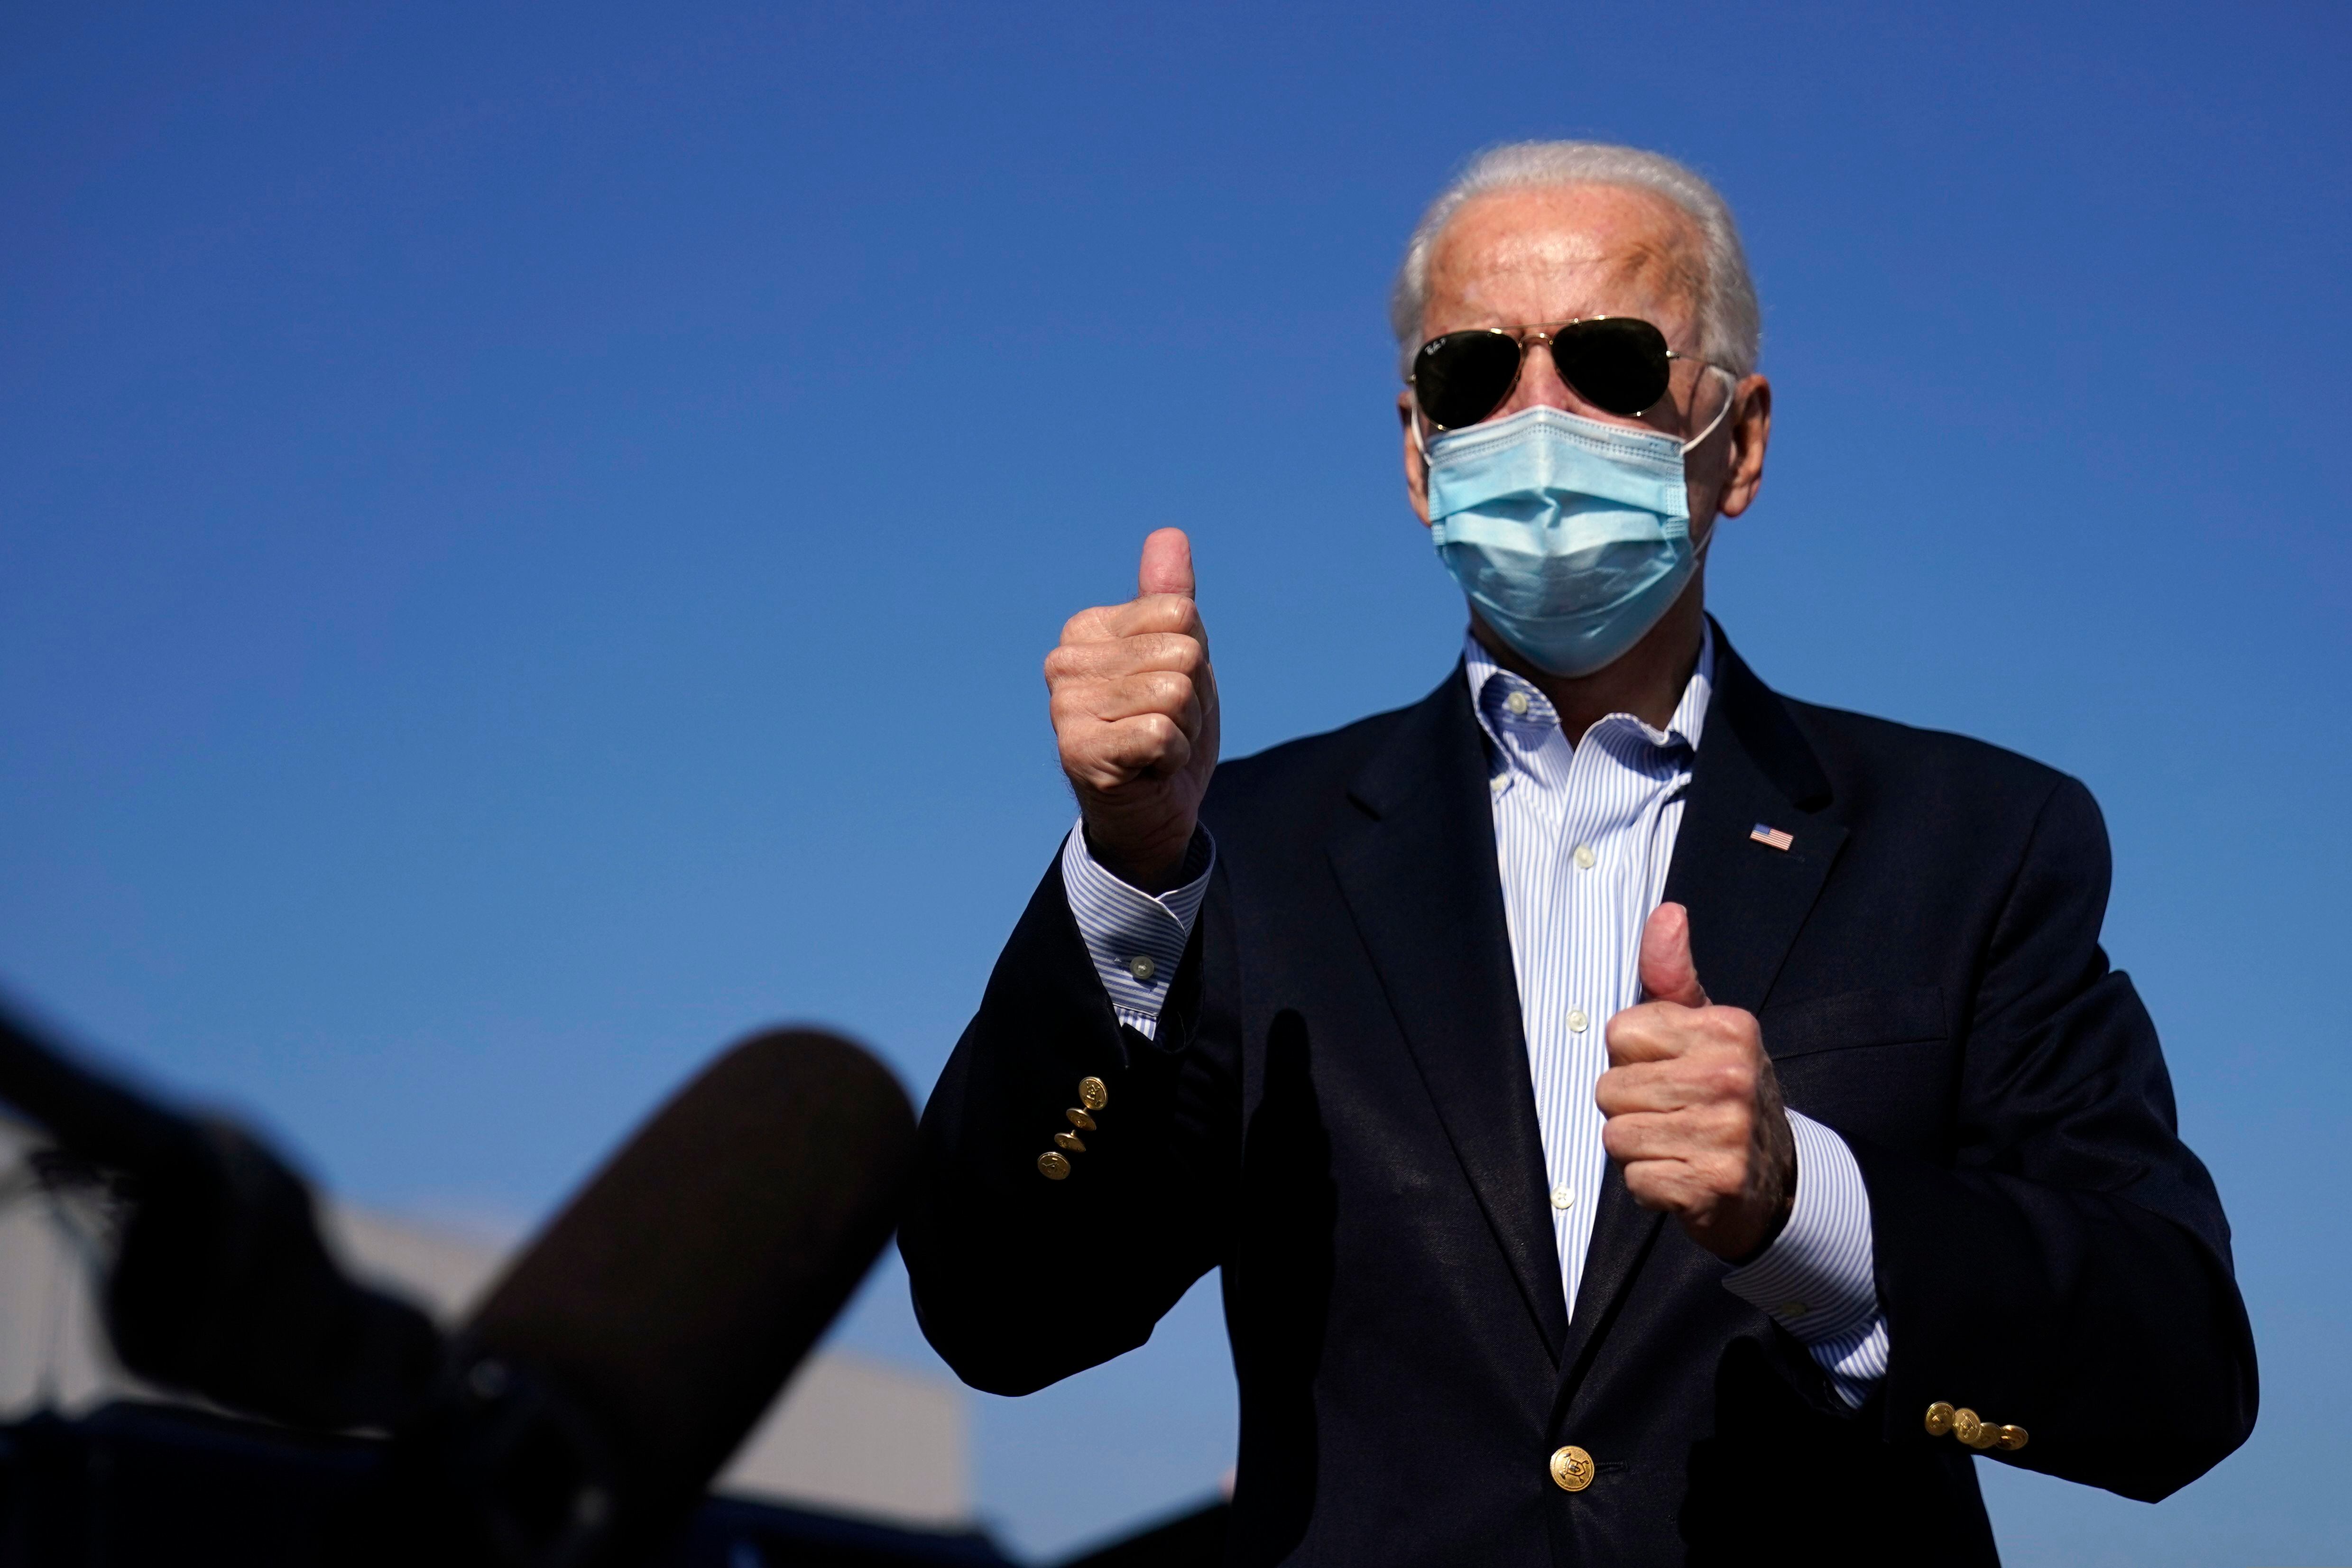 Trump, Biden fight over the raging virus, climate and race